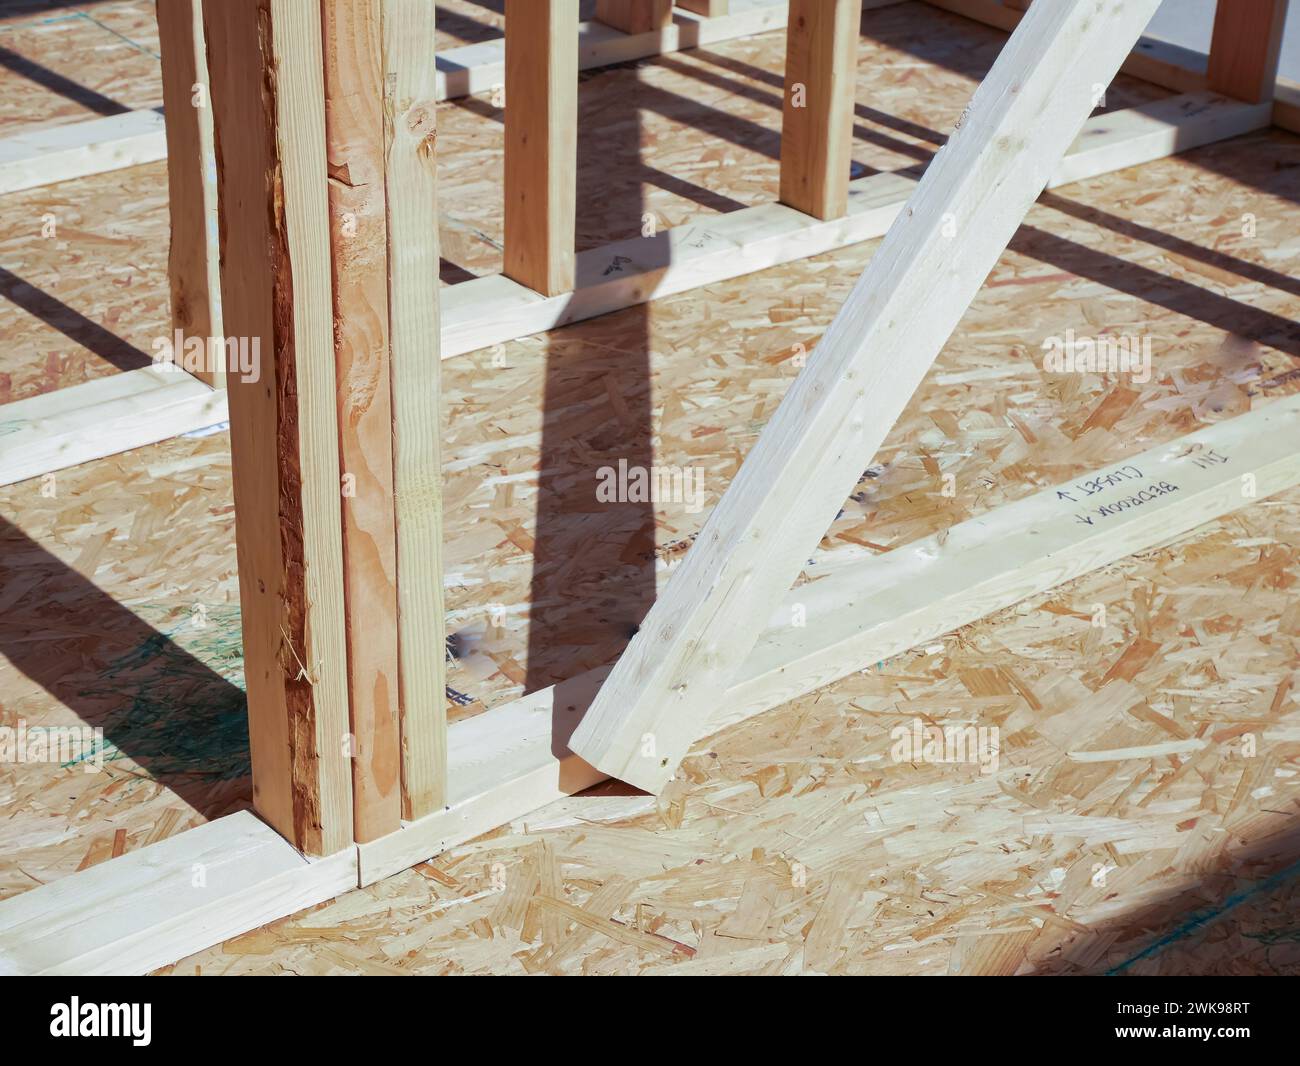 OSB sub flooring sheets cover, attach to the joists with wood screws Oriented Strand Board plywood, timber framing with posts beams studs of new house Stock Photo